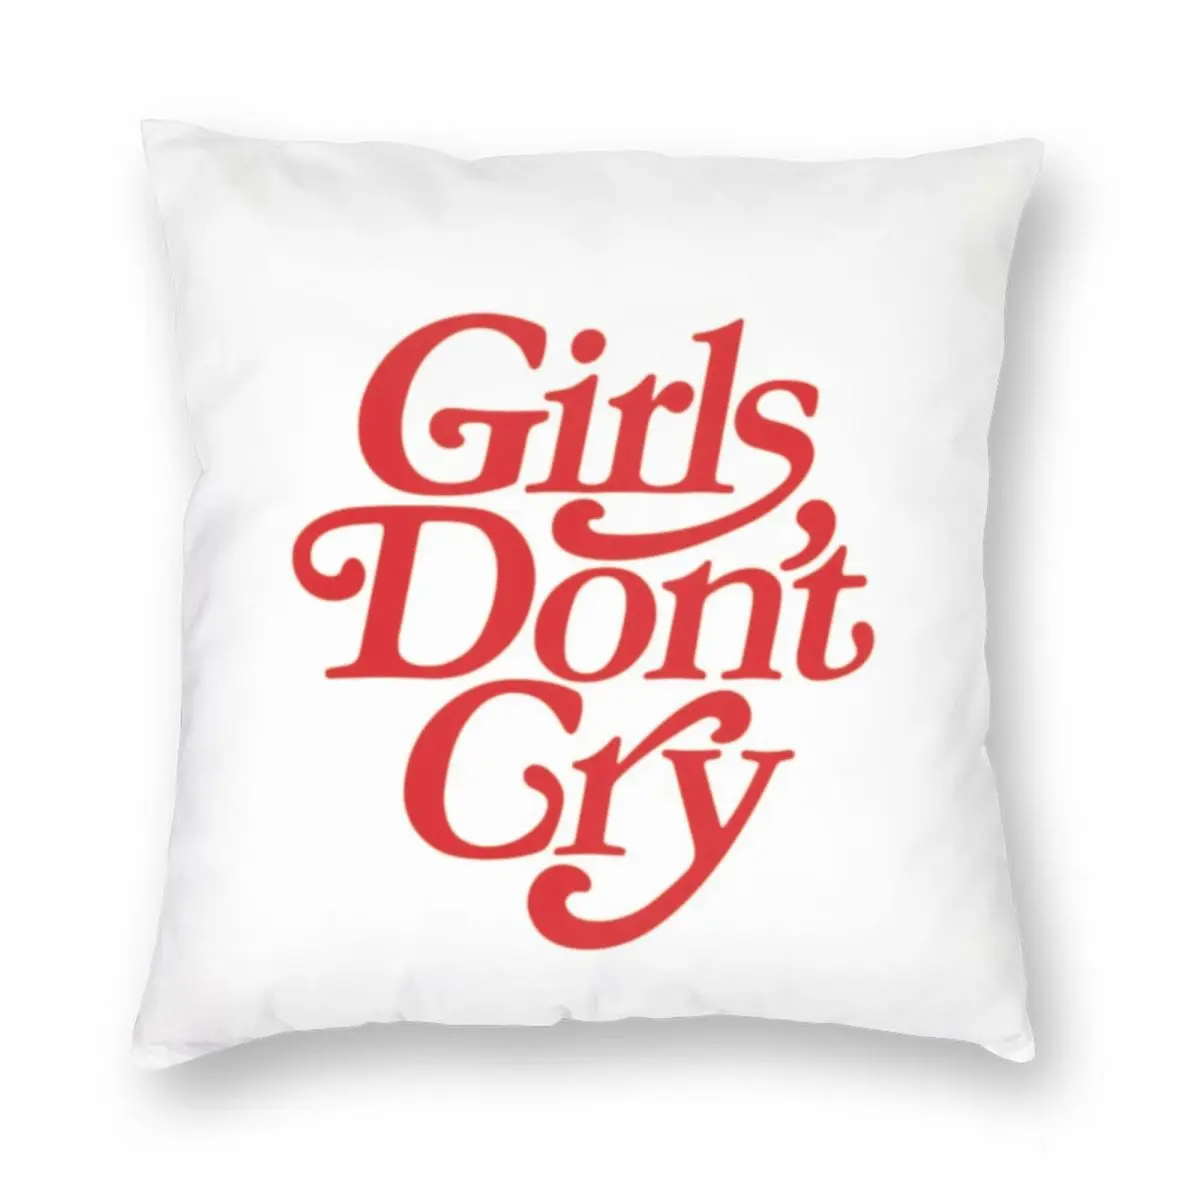 

Girls Don't Cry Square Pillowcase Polyester Linen Velvet Pattern Zip Decorative Throw Pillow Case Bed Cushion Cover 45x45